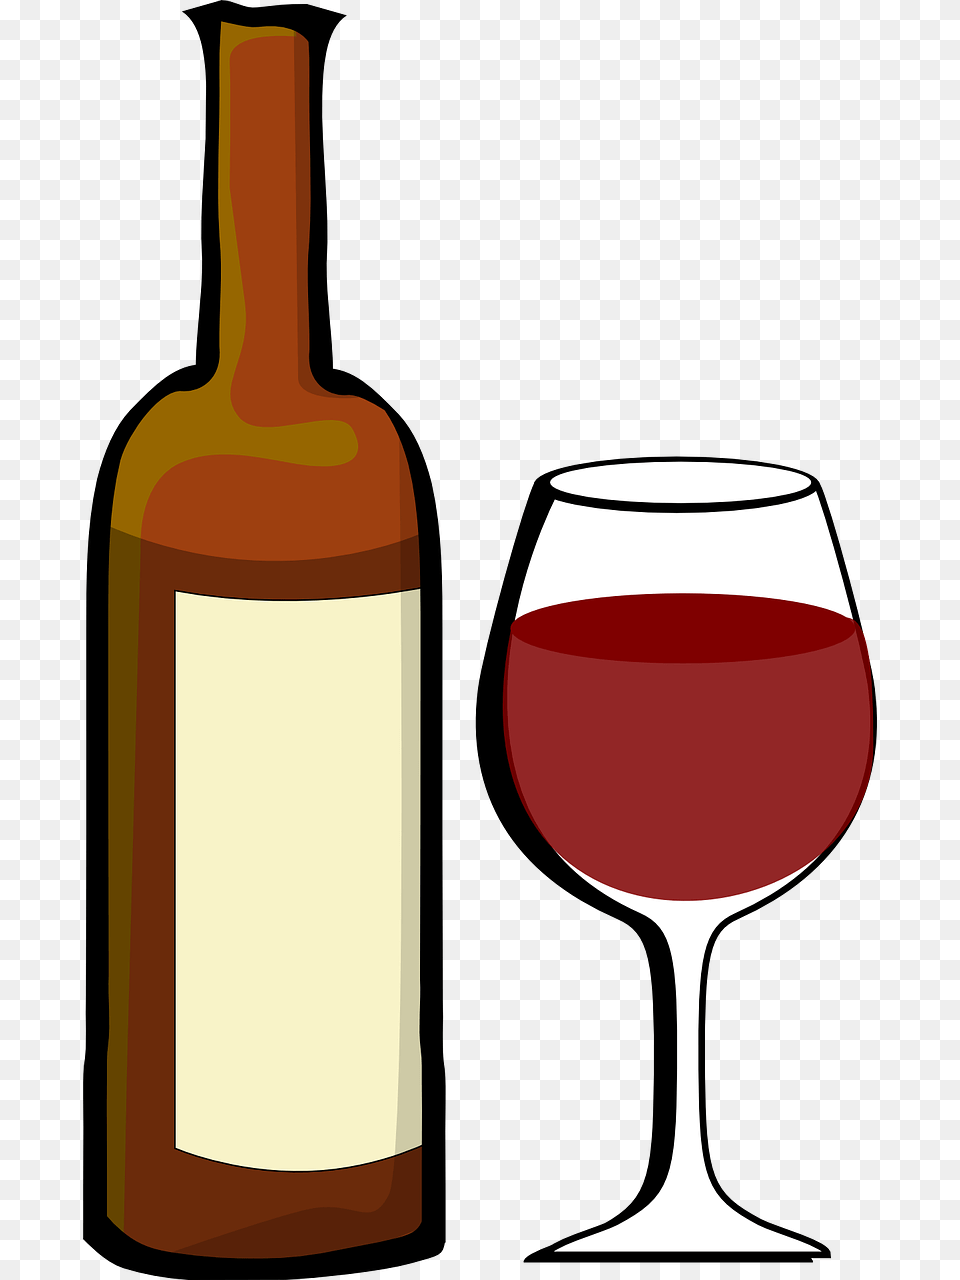 Download Wine Clipart Red Wine Clip Art Wine Bottle Product, Alcohol, Beverage, Wine Bottle, Glass Free Png